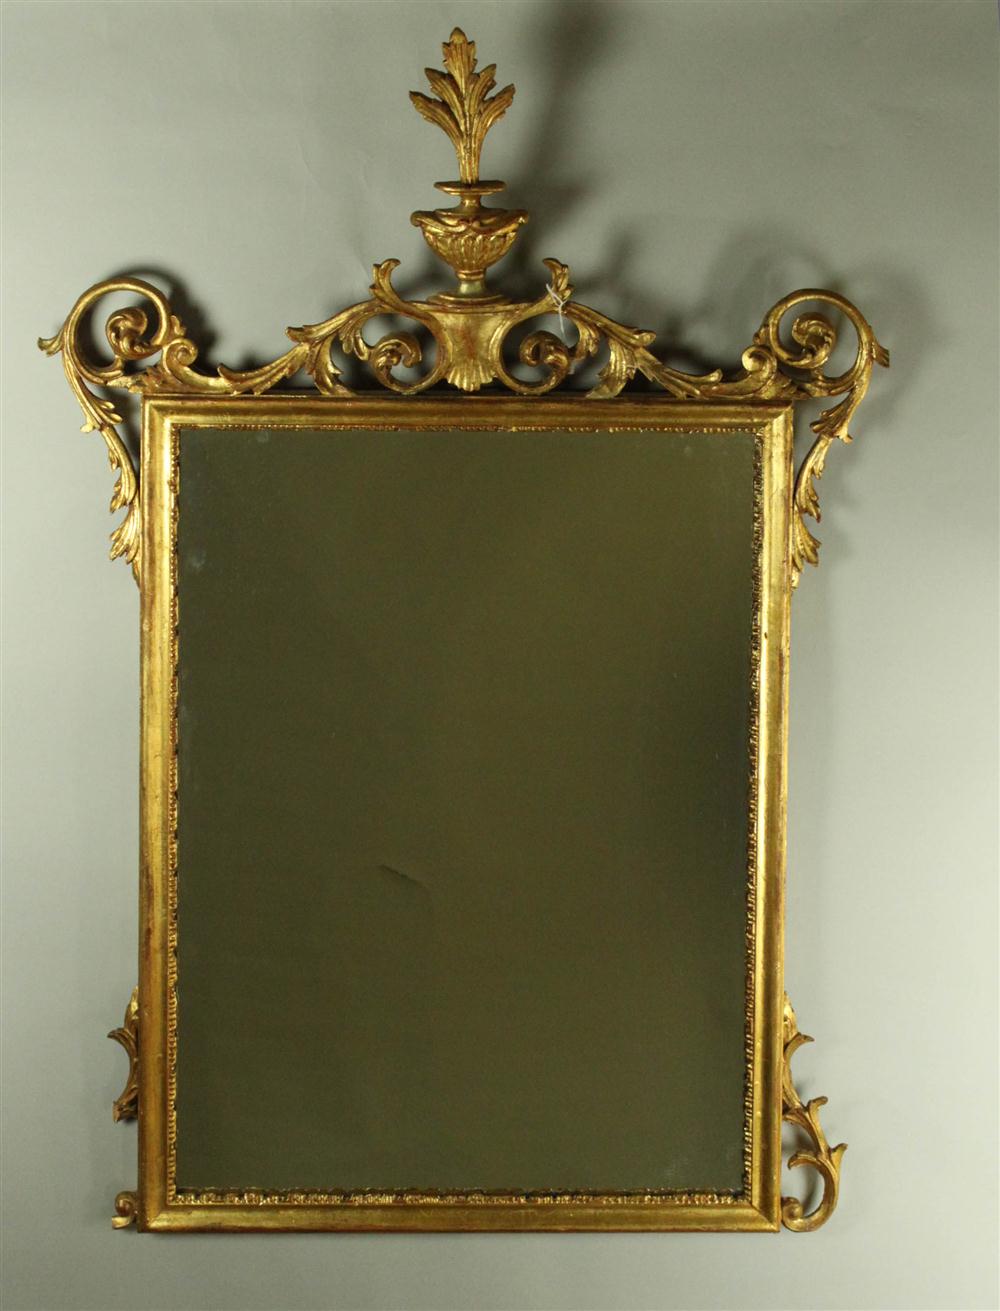 RECTANGULAR MIRROR SURROUNDED BY SCROLLWORK